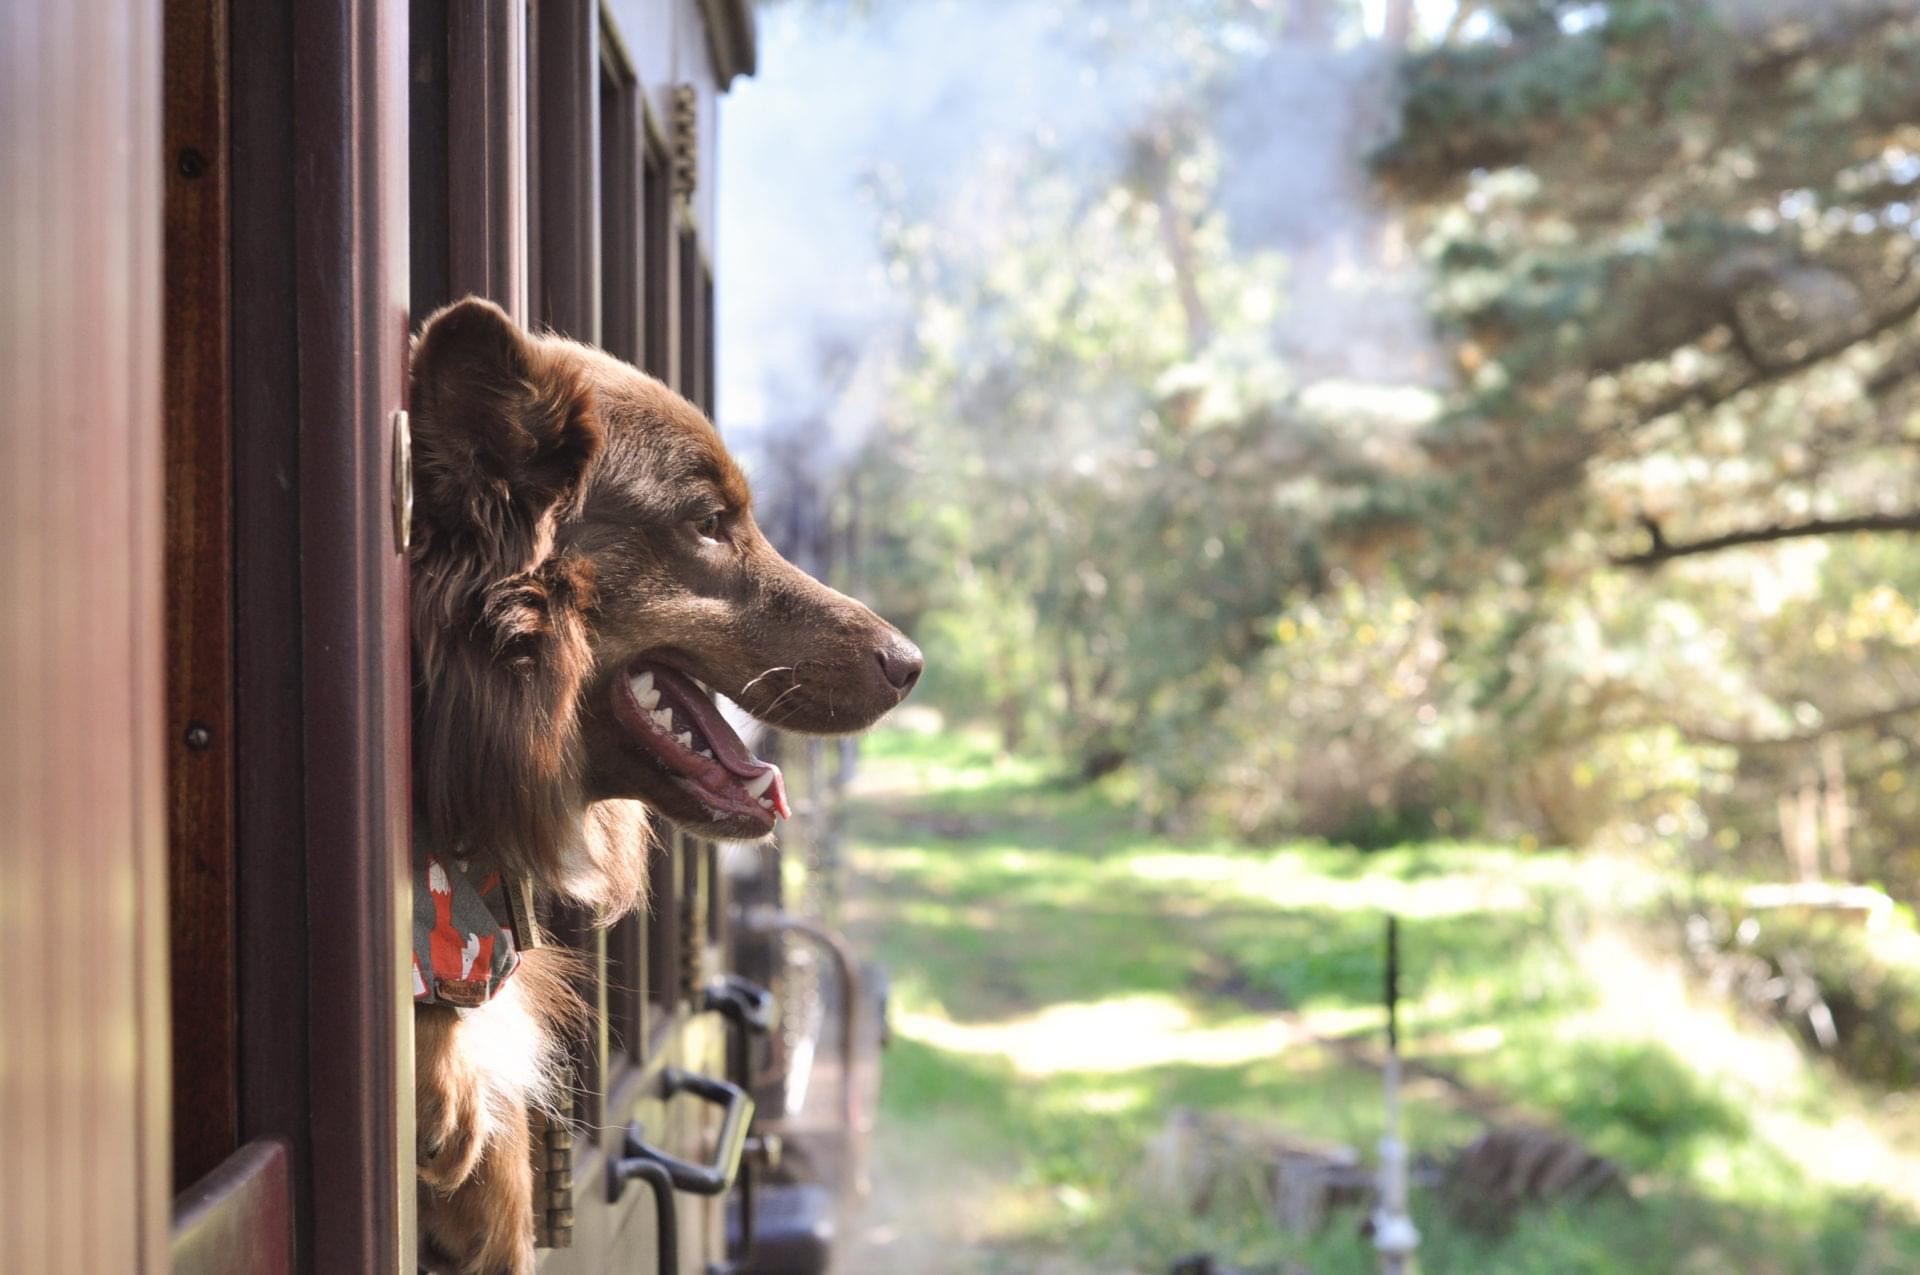 The Puffing Billy Dog Express